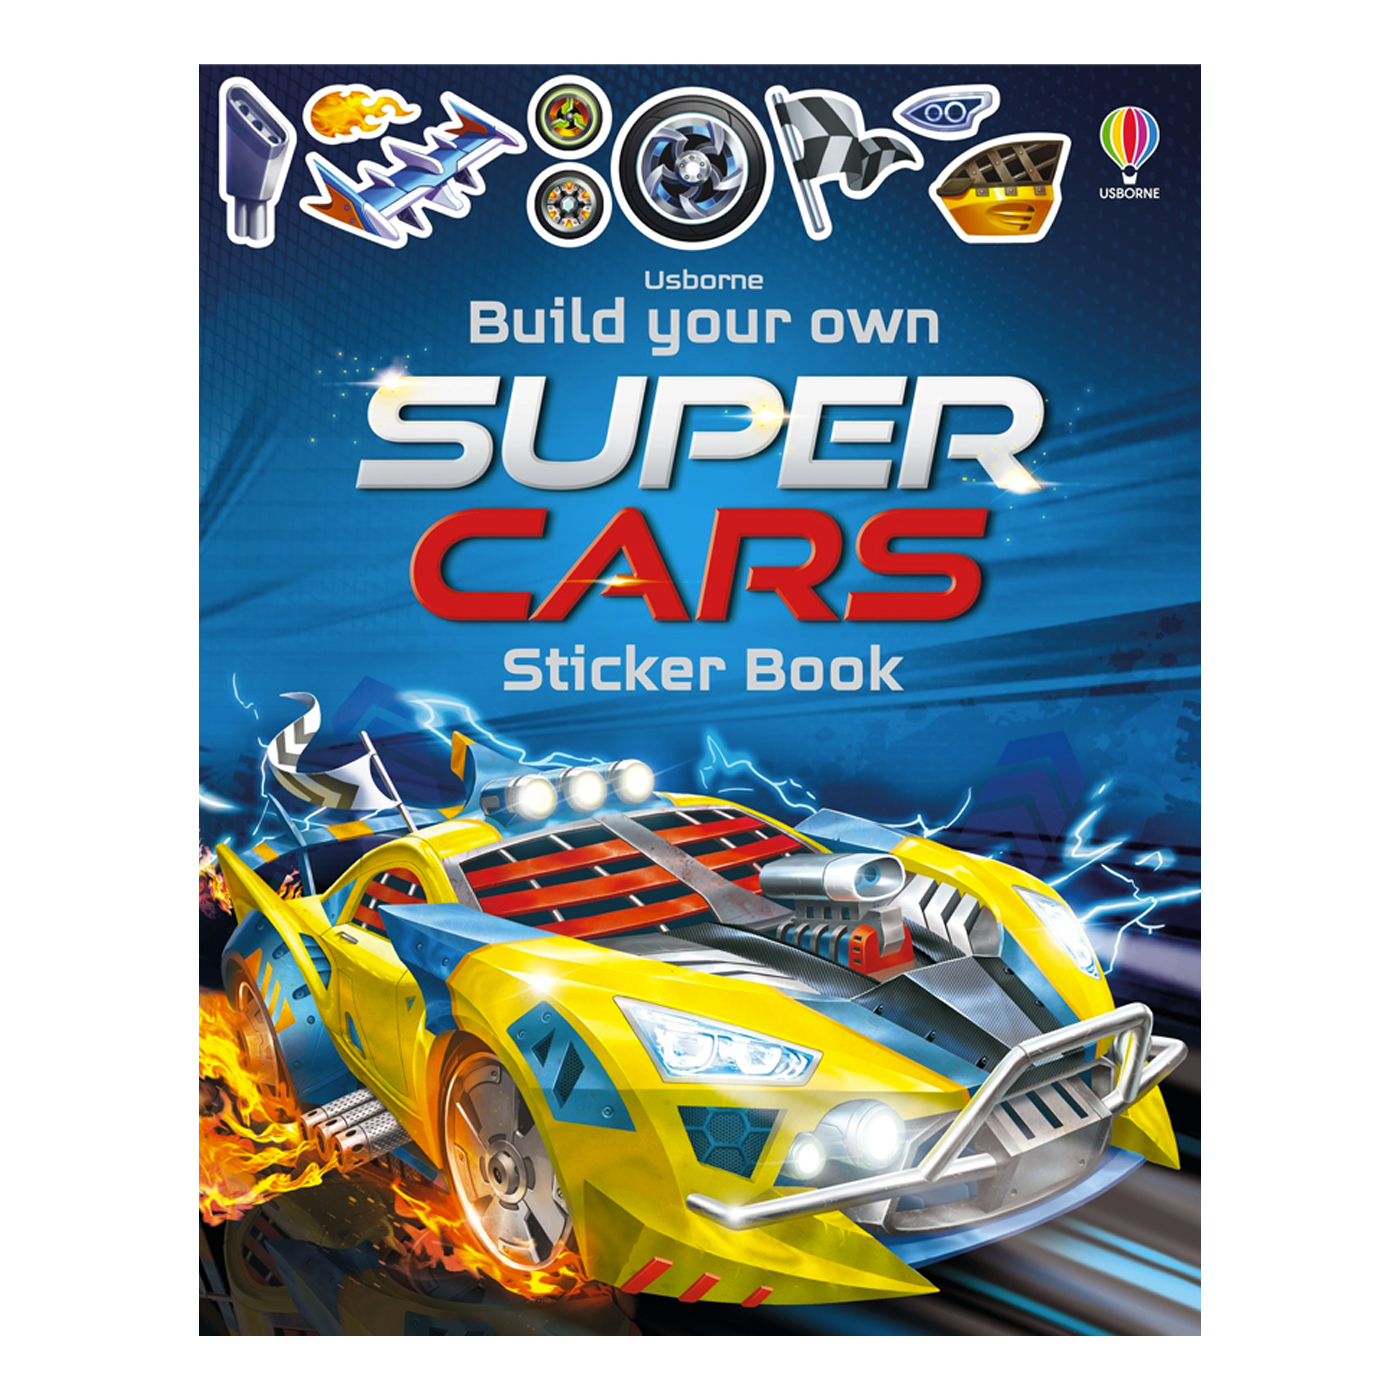  Build Your Own Supercars Sticker Book